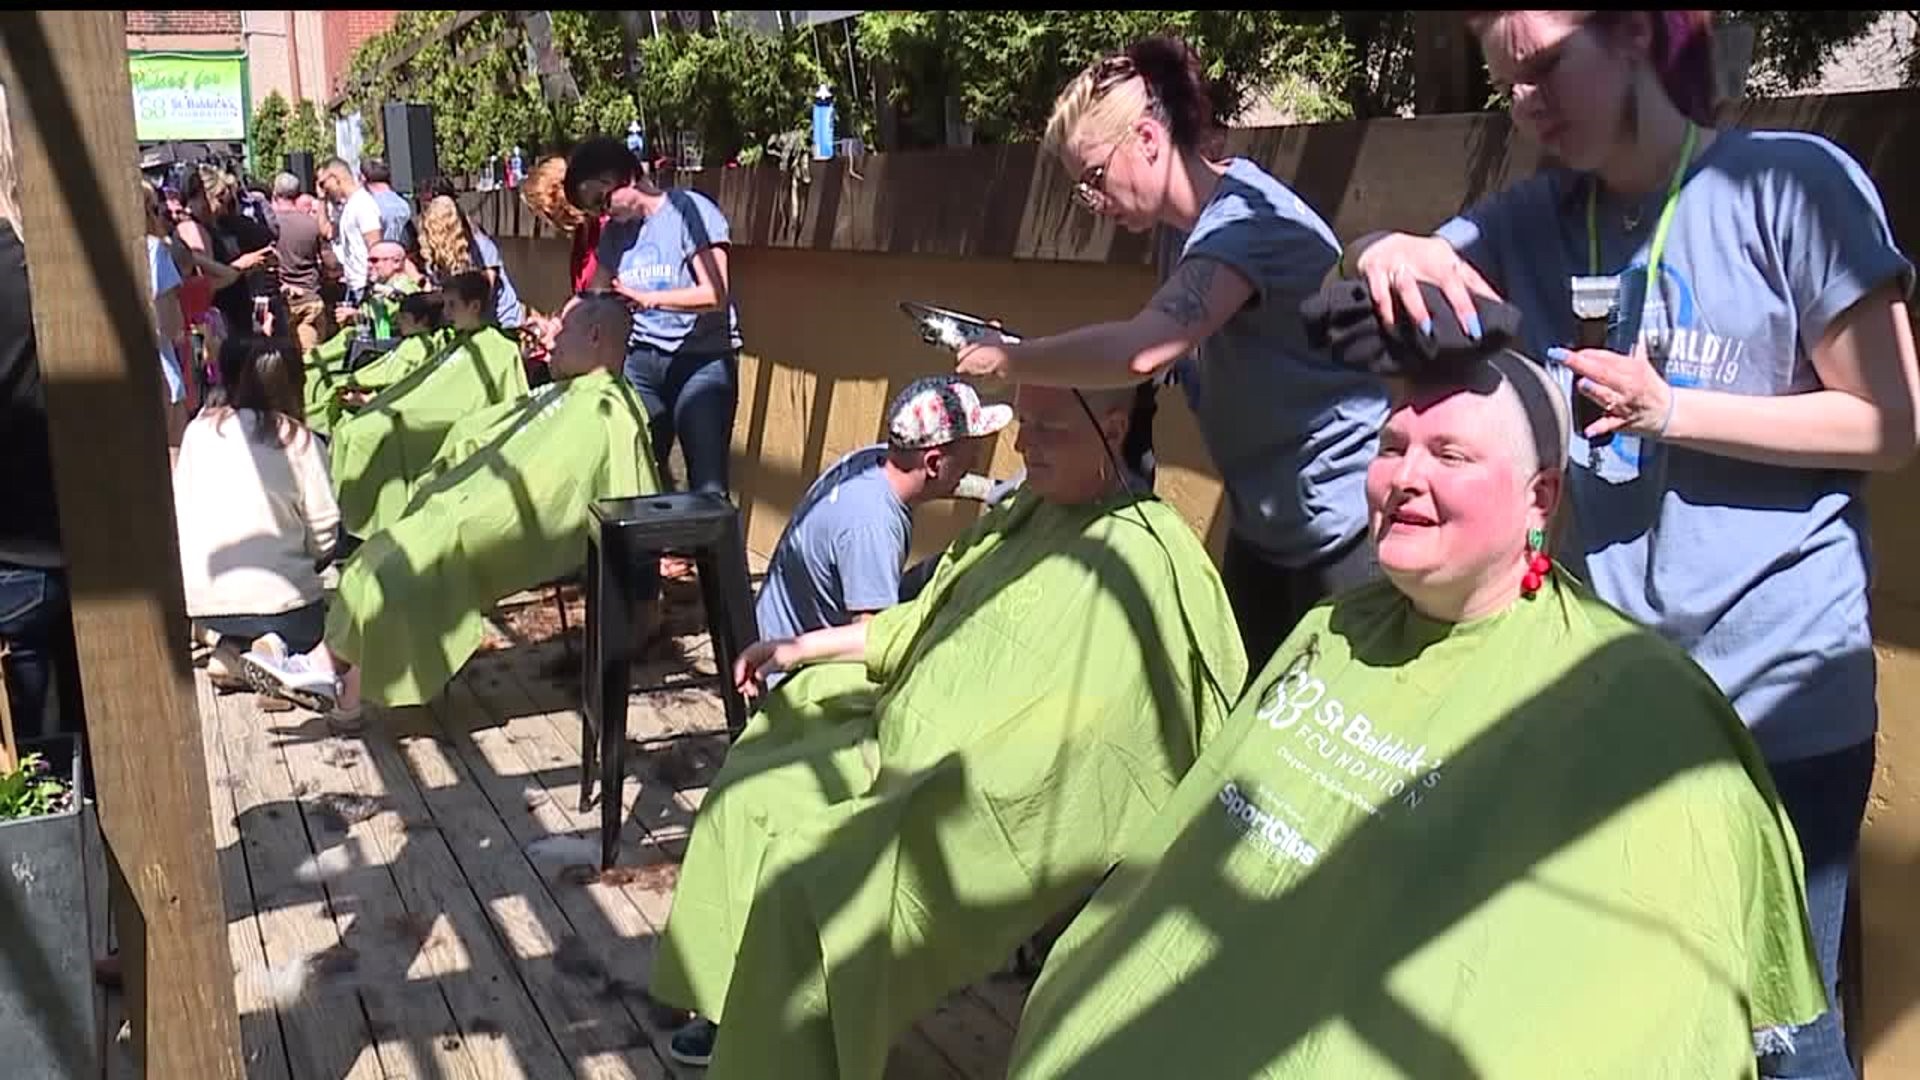 Annual head shaving event helps fight childhood cancer